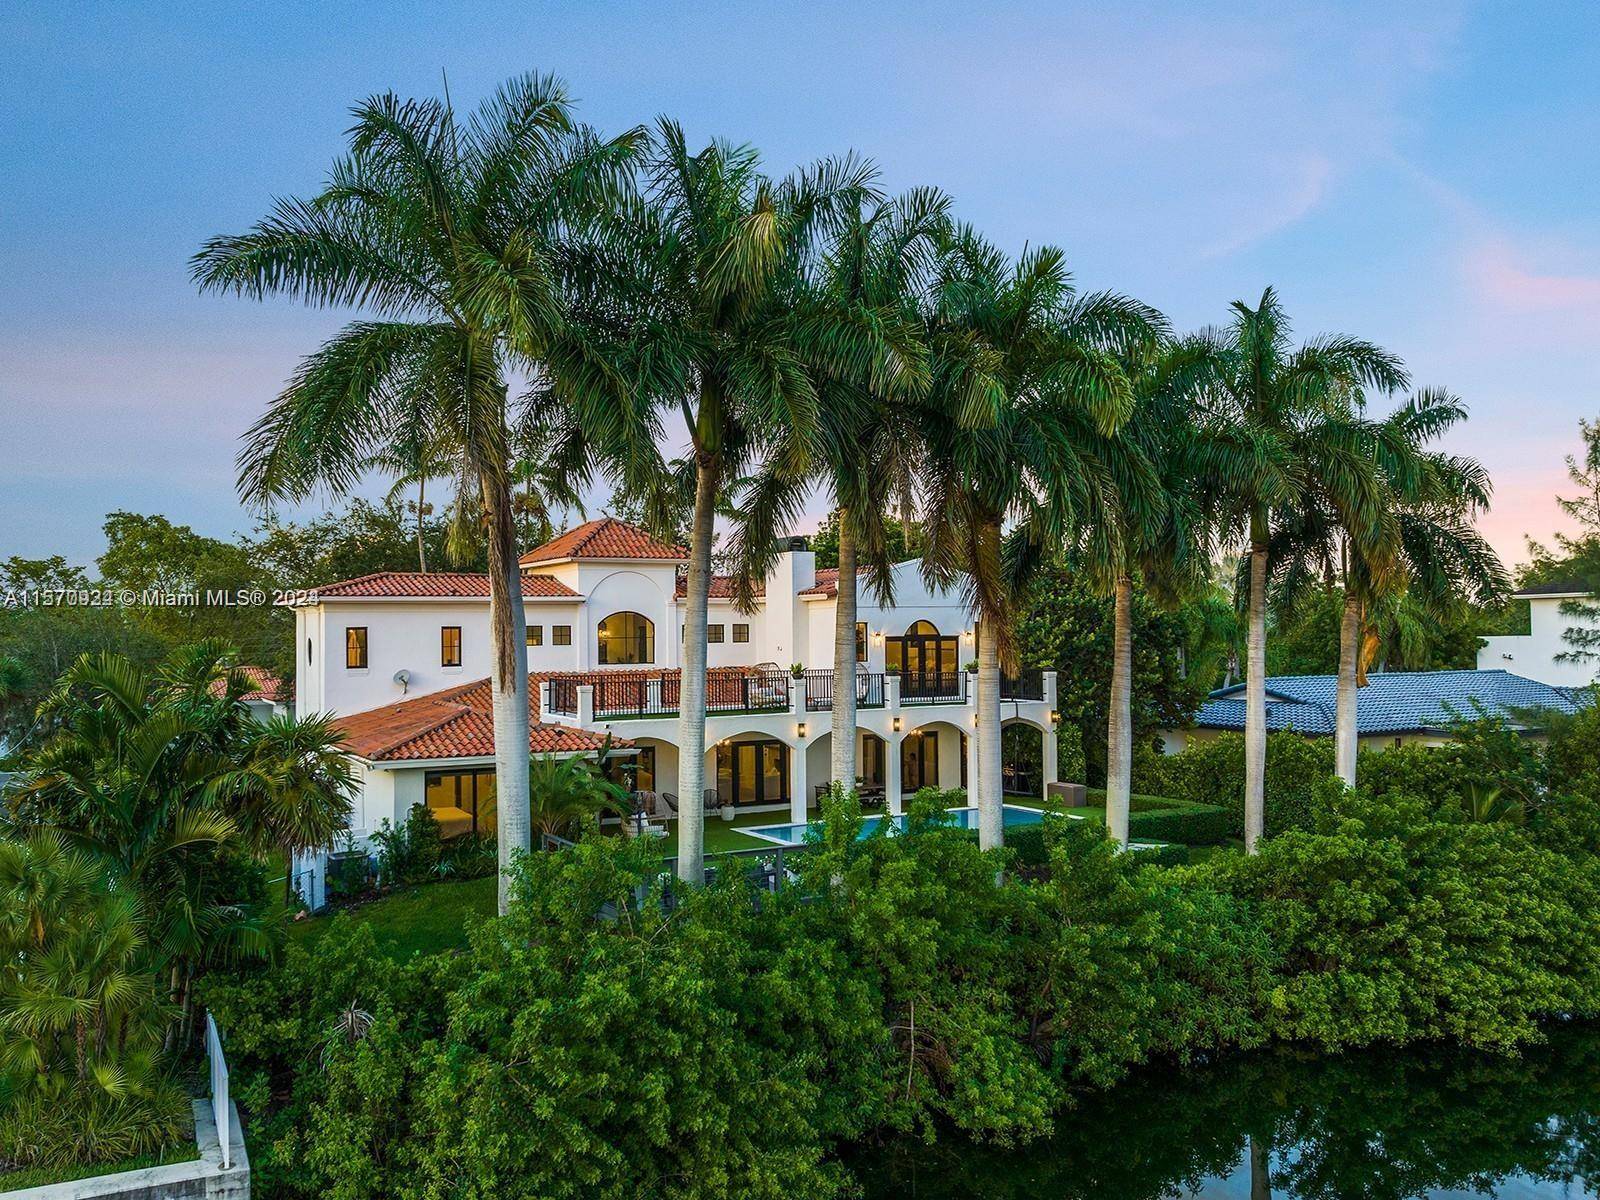 Stunning two story residence situated along the canal in the prestigious guard gated community of Gables by the Sea.